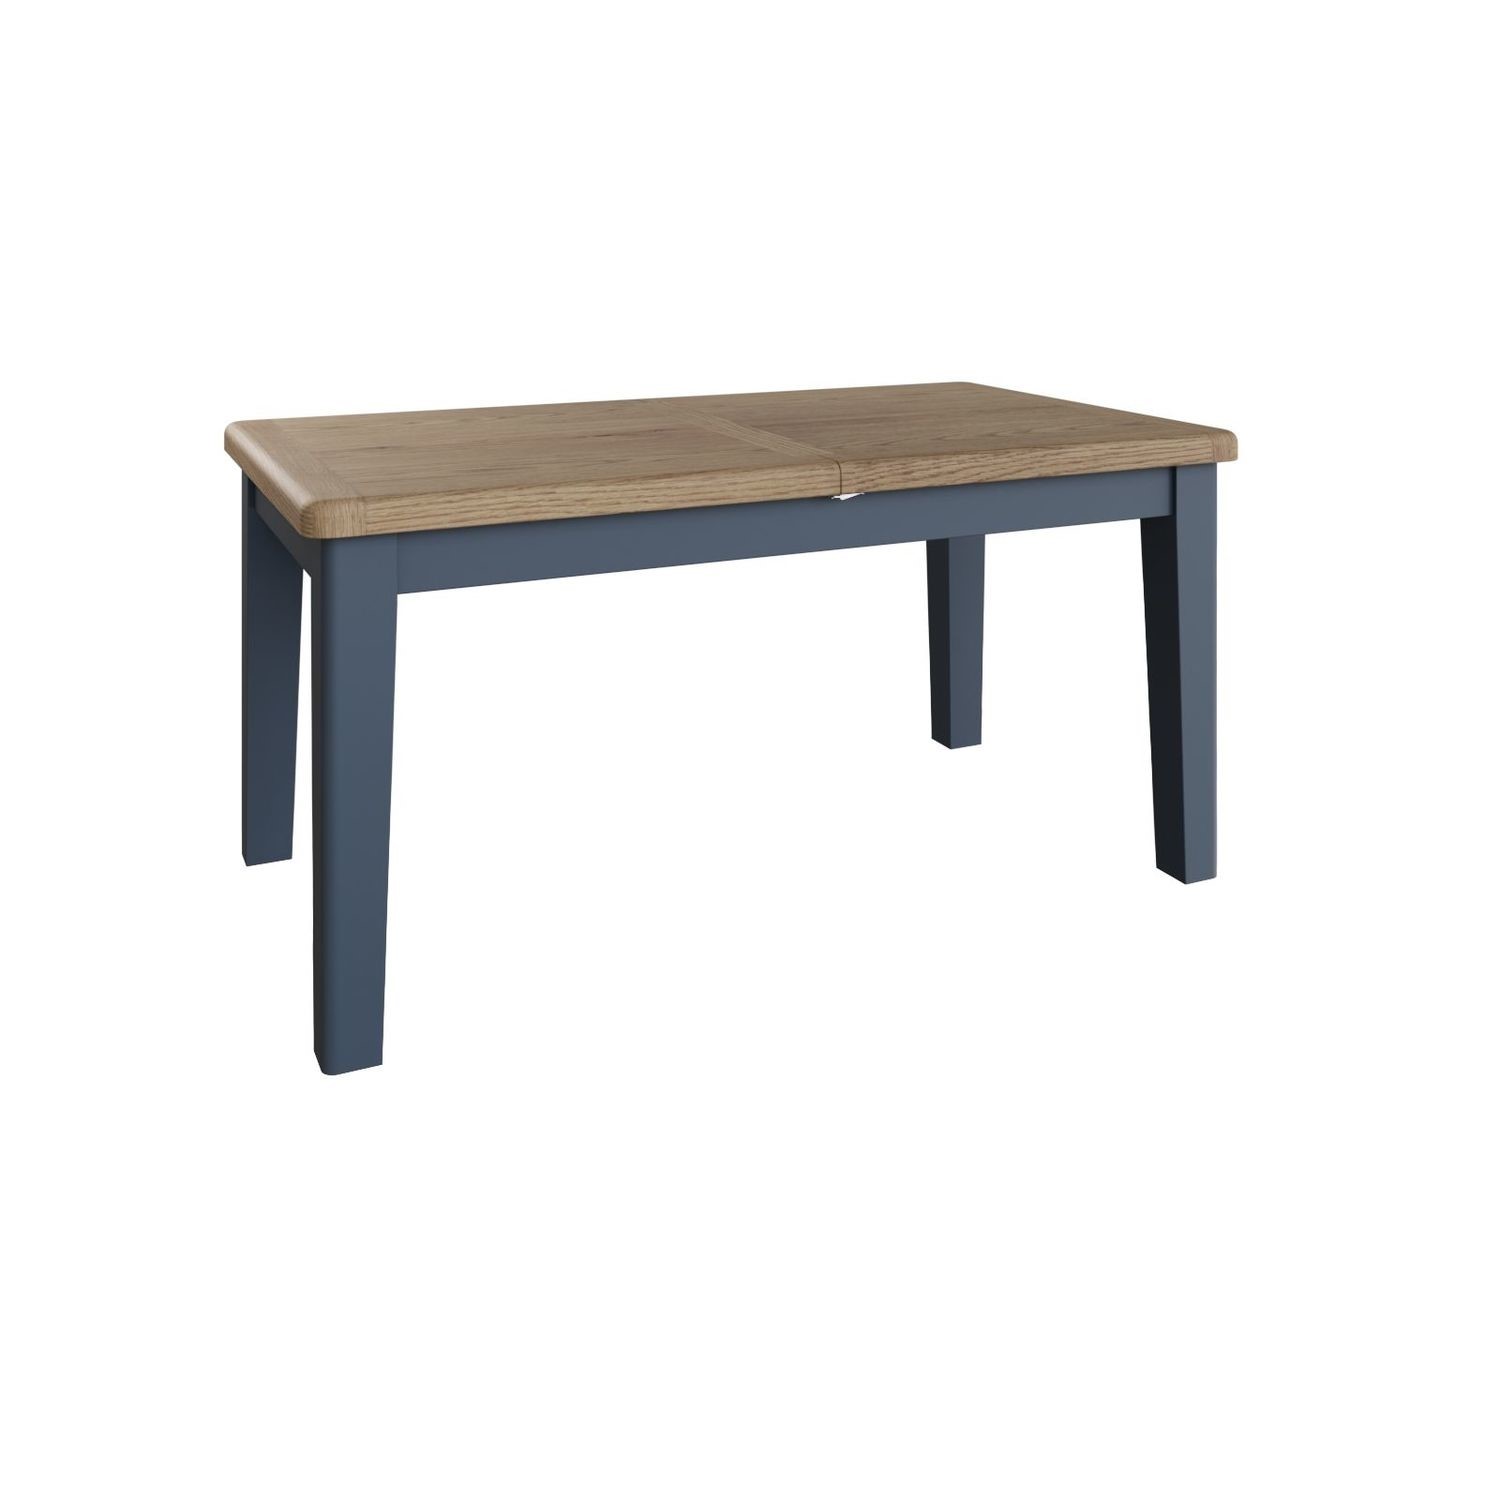 Read more about Navy & oak extendable dining table seats 8 pegasus